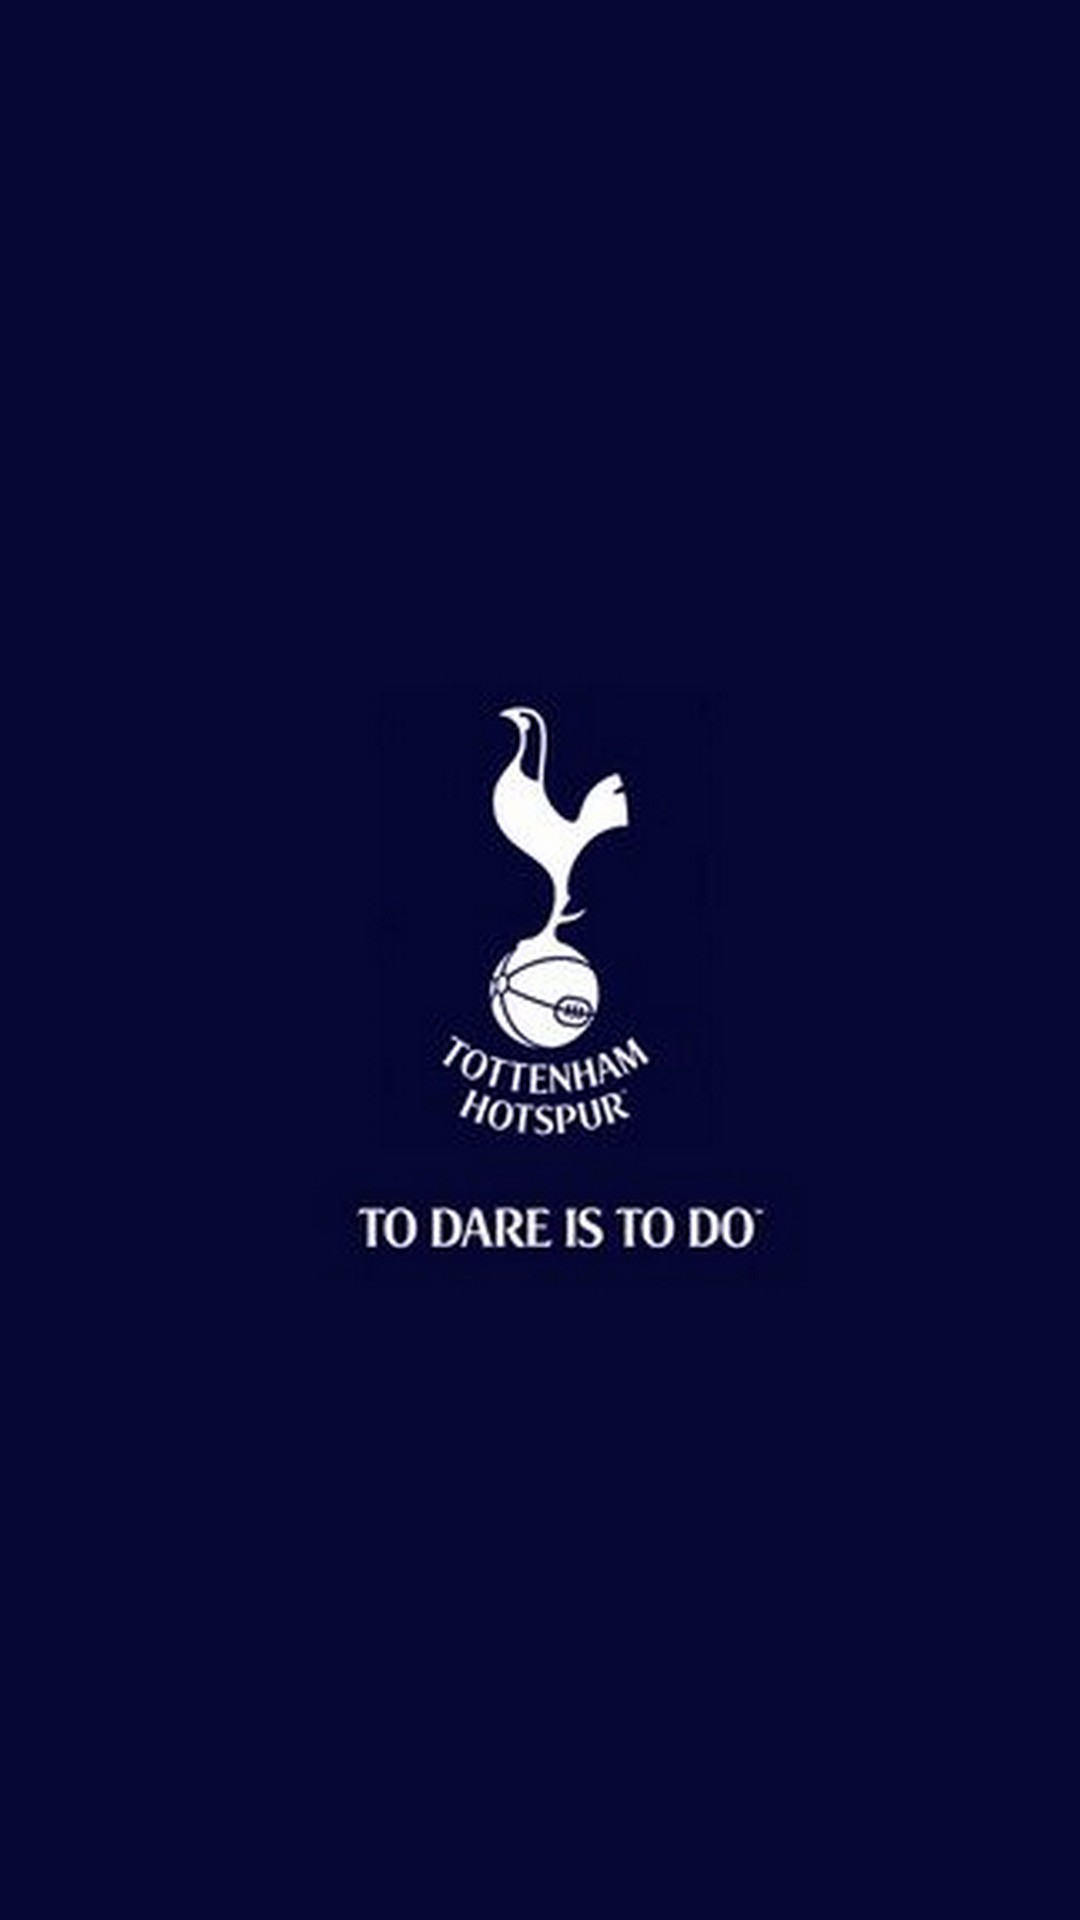 iPhone 8 Wallpaper Tottenham Hotspur With high-resolution 1080X1920 pixel. You can use this wallpaper for your iPhone 5, 6, 7, 8, X, XS, XR backgrounds, Mobile Screensaver, or iPad Lock Screen